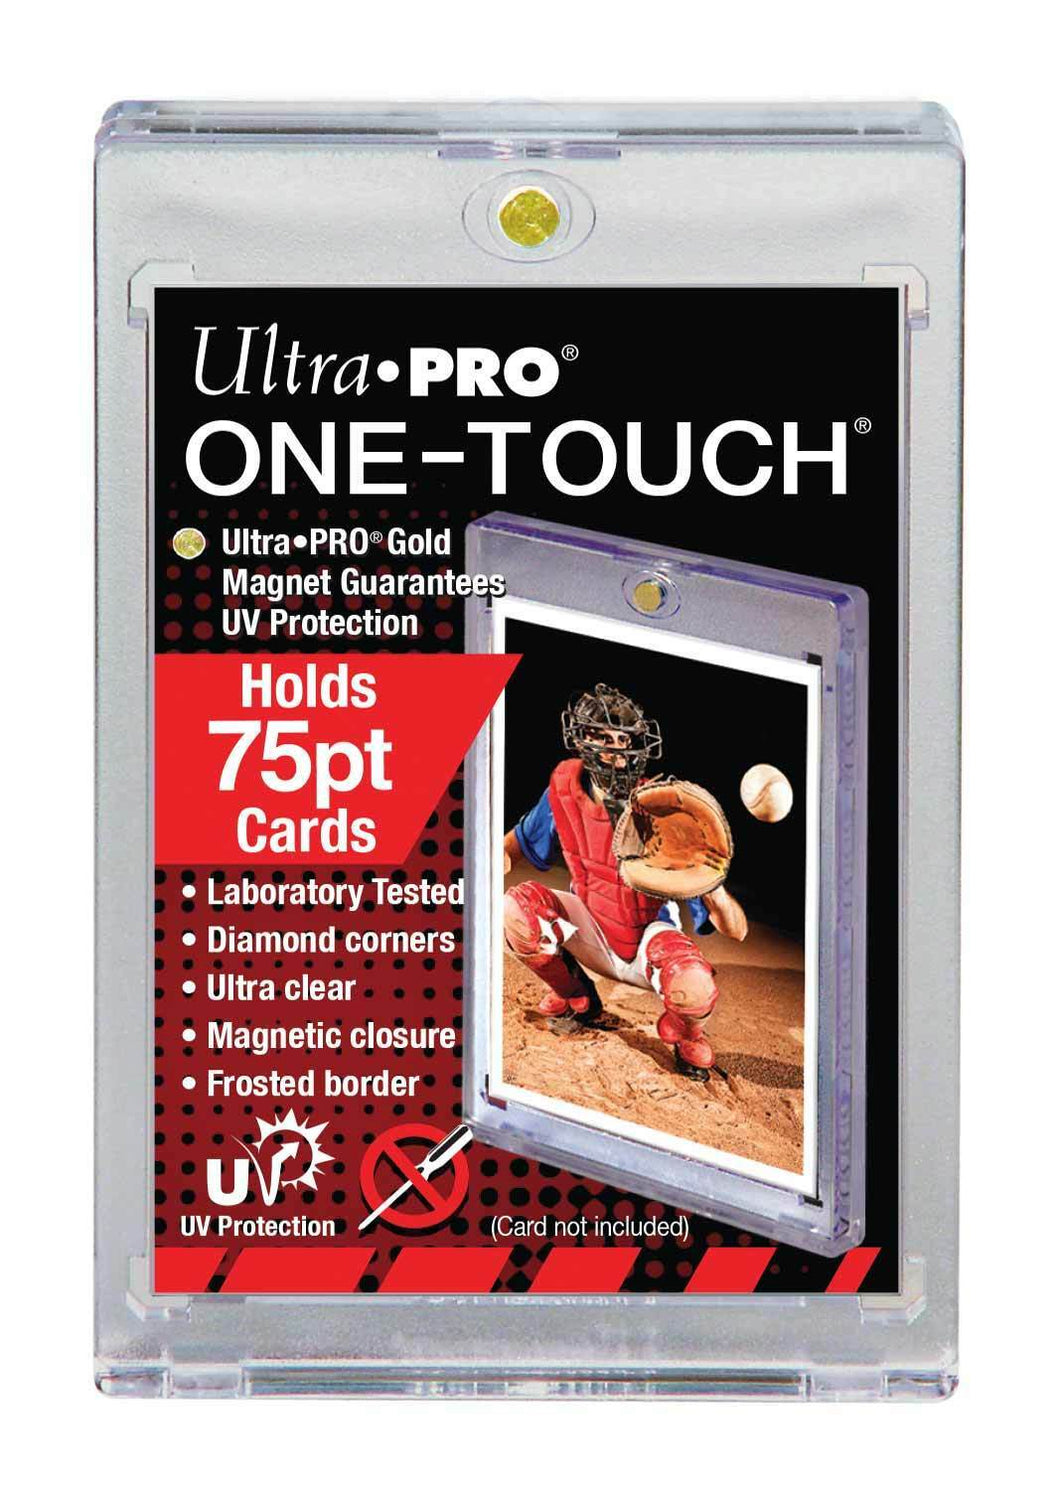 Ultra Pro One-Touch 75pt